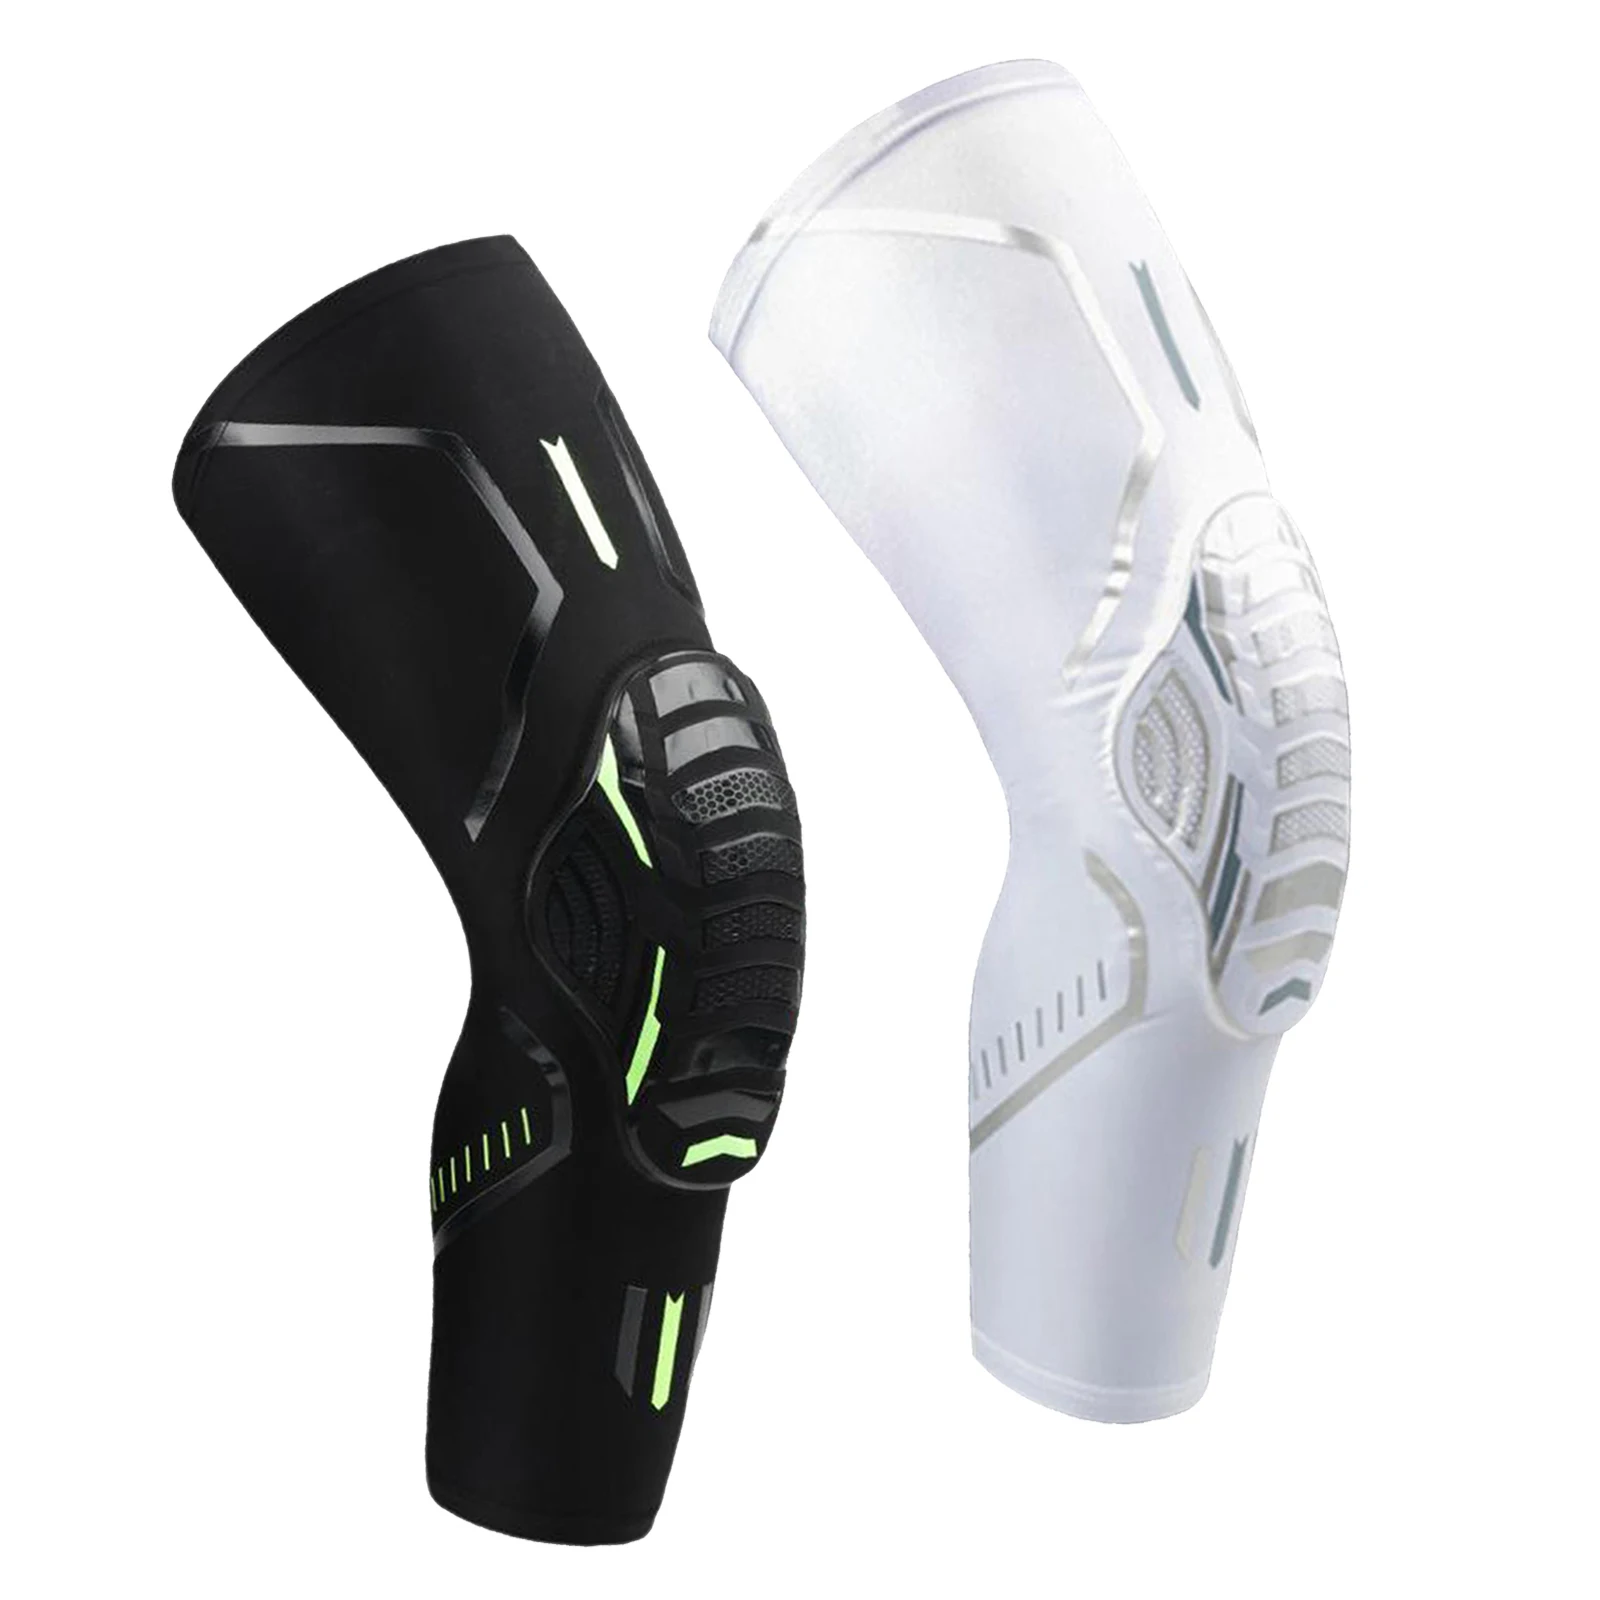 Protective Elbow Knee Anti-slip Pads Guards Motocross Cycling Skating Protector Outdoors Skiing Baseball Bike Bicycle Accessorie